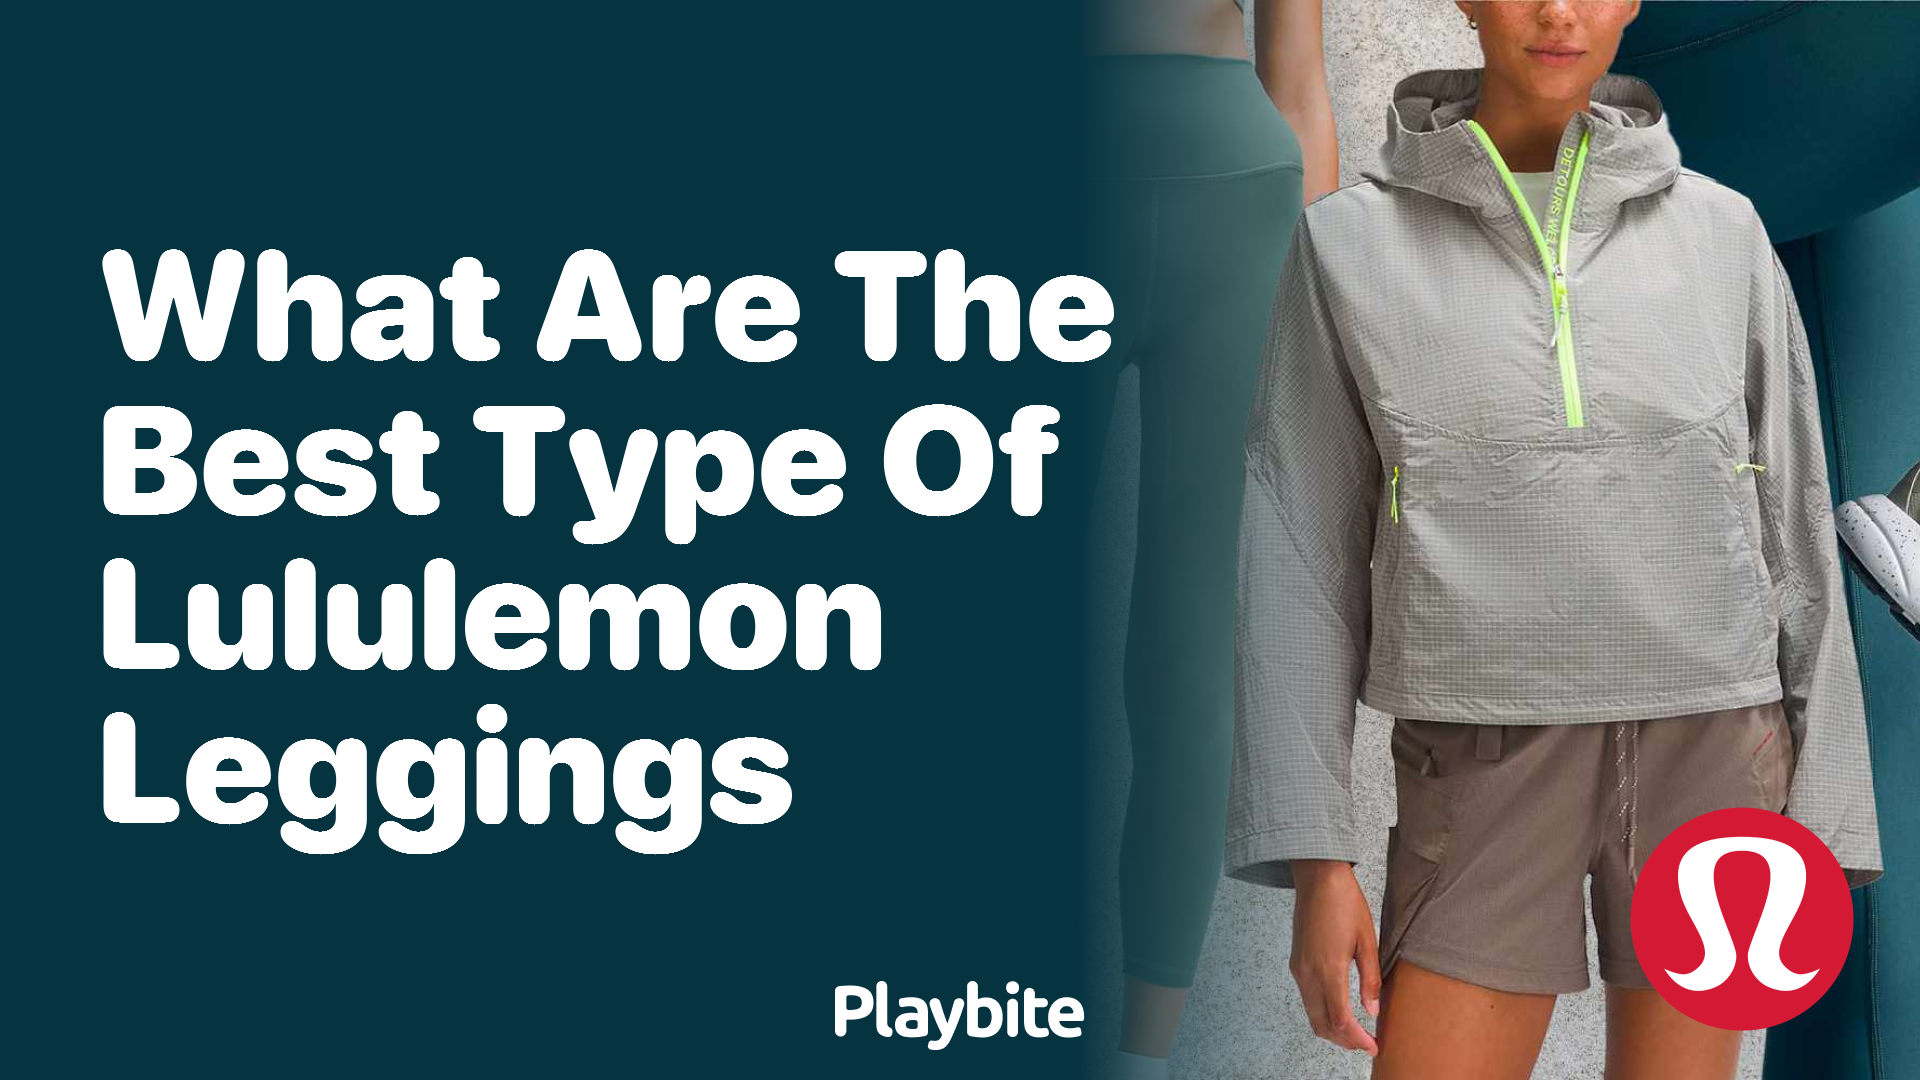 https://www.playbite.com/wp-content/uploads/sites/3/2024/03/what-are-the-best-type-of-lululemon-leggings.png